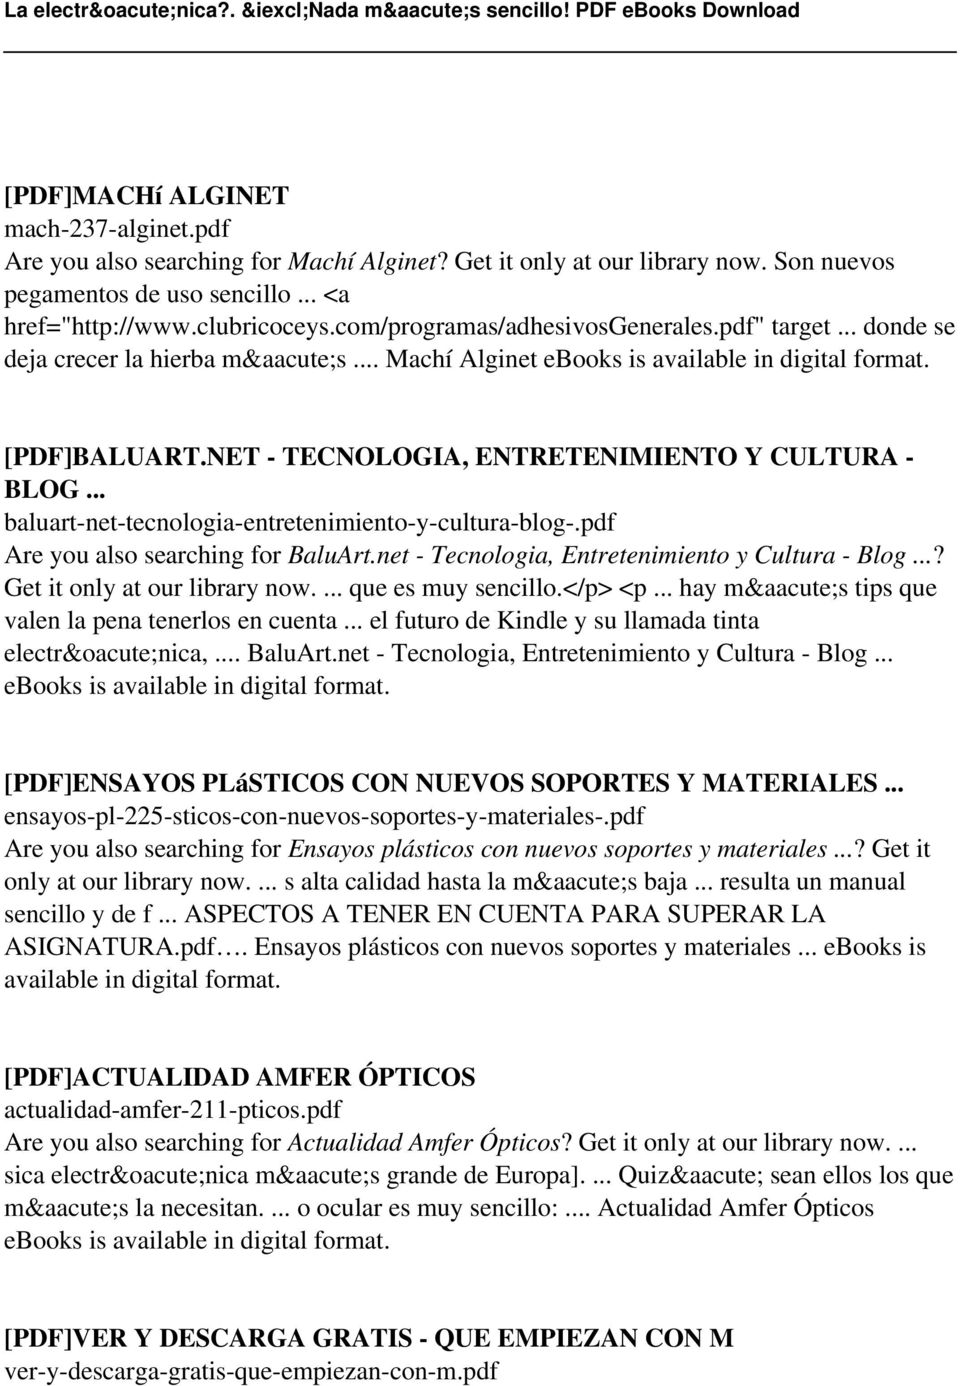 .. baluart-net-tecnologia-entretenimiento-y-cultura-blog-.pdf Are you also searching for BaluArt.net - Tecnologia, Entretenimiento y Cultura - Blog...? Get it only at our library now.